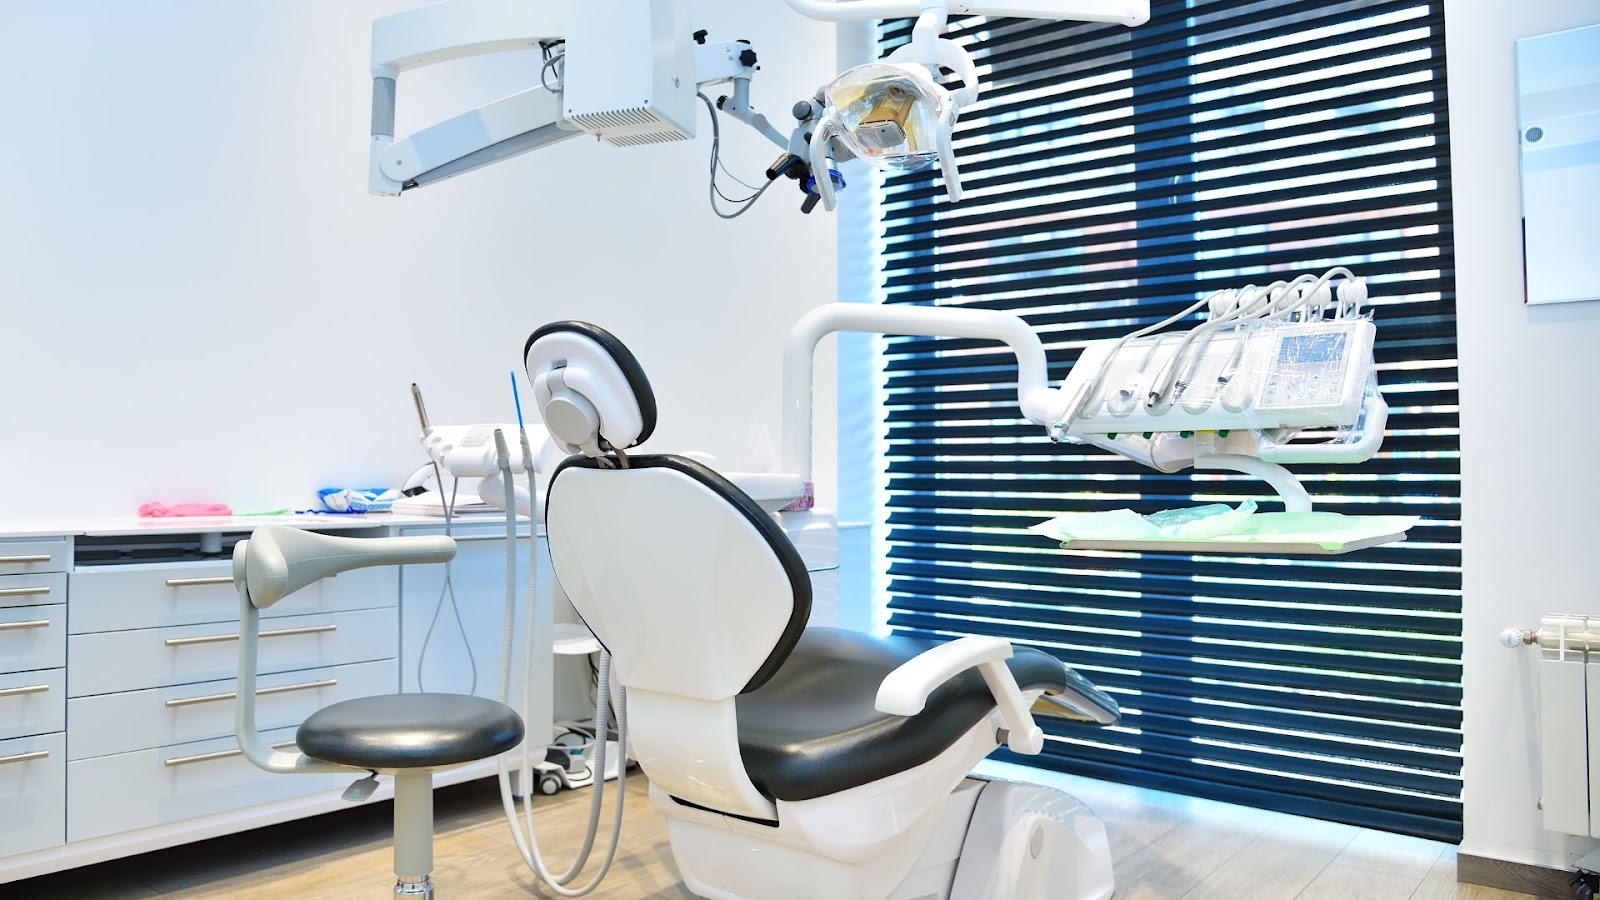 Dental Implant Marketing – How Can Office Décor Contribute to a Strong Sales Process?